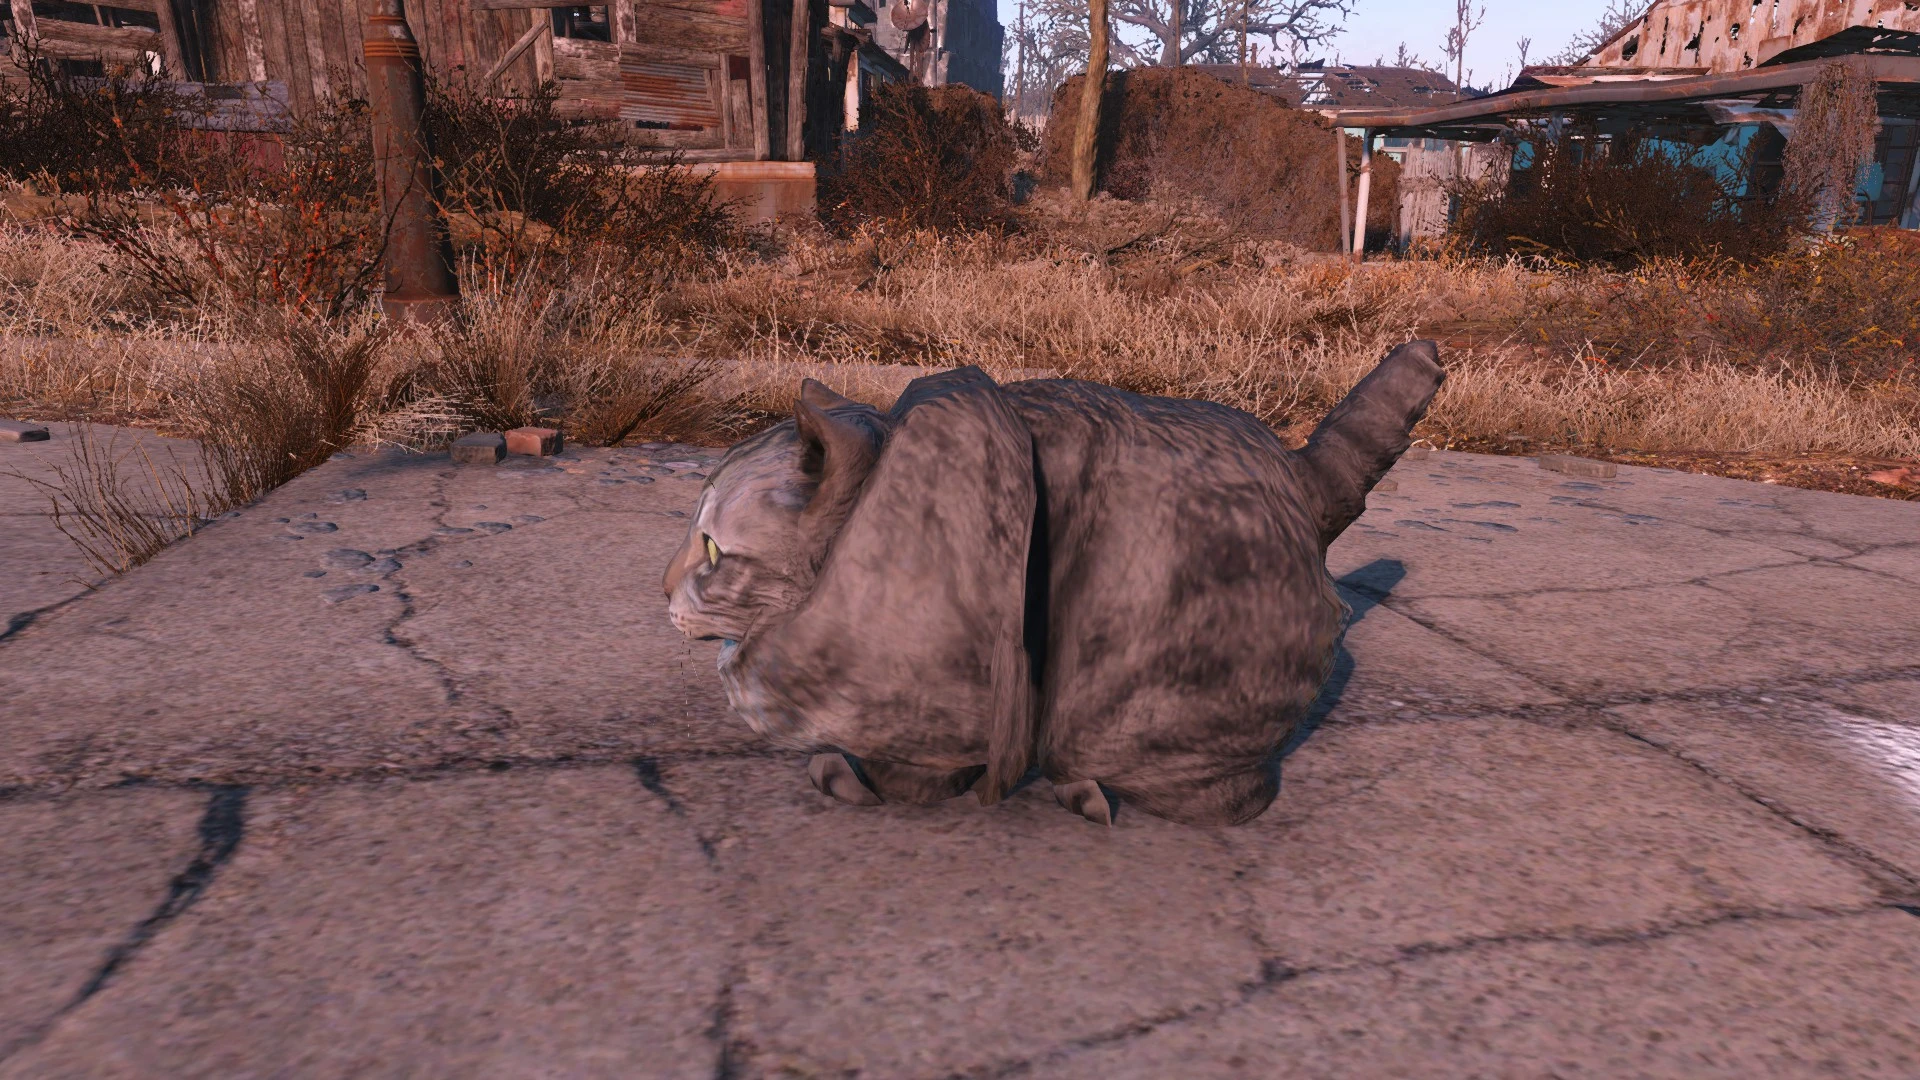 fallout 4 cat house